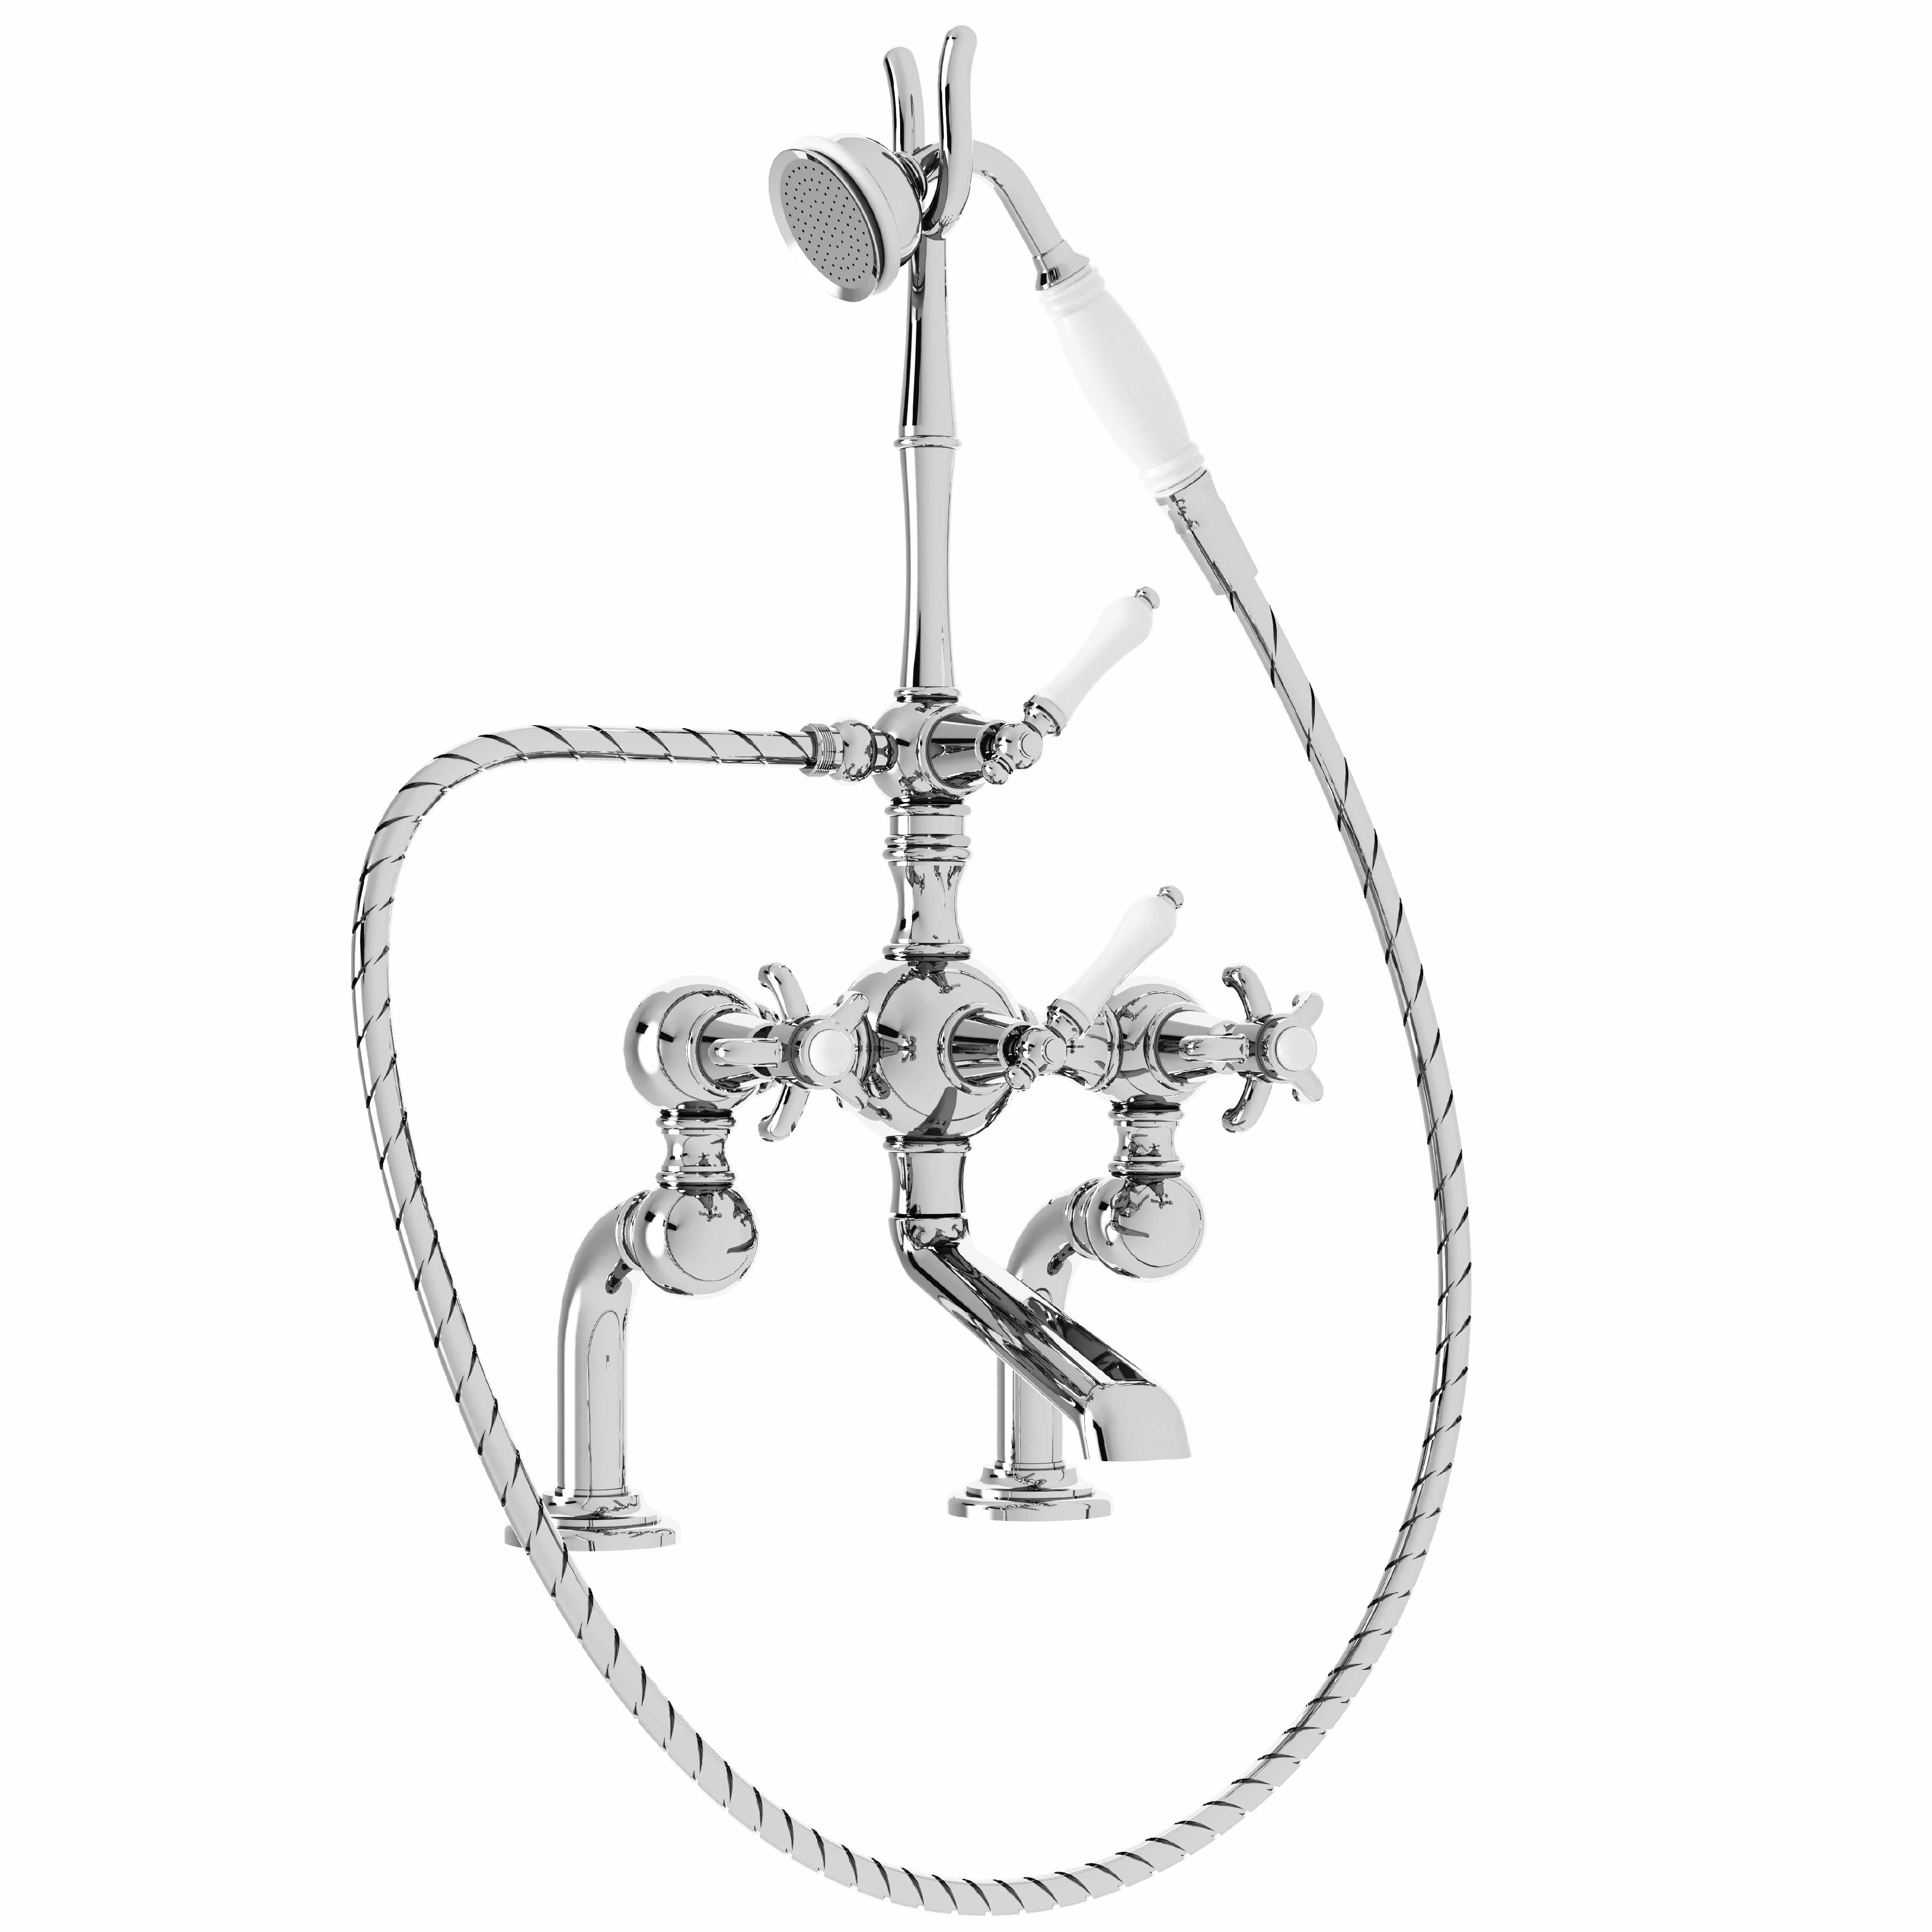 M01-3306 Rim mounted bath and shower mixer